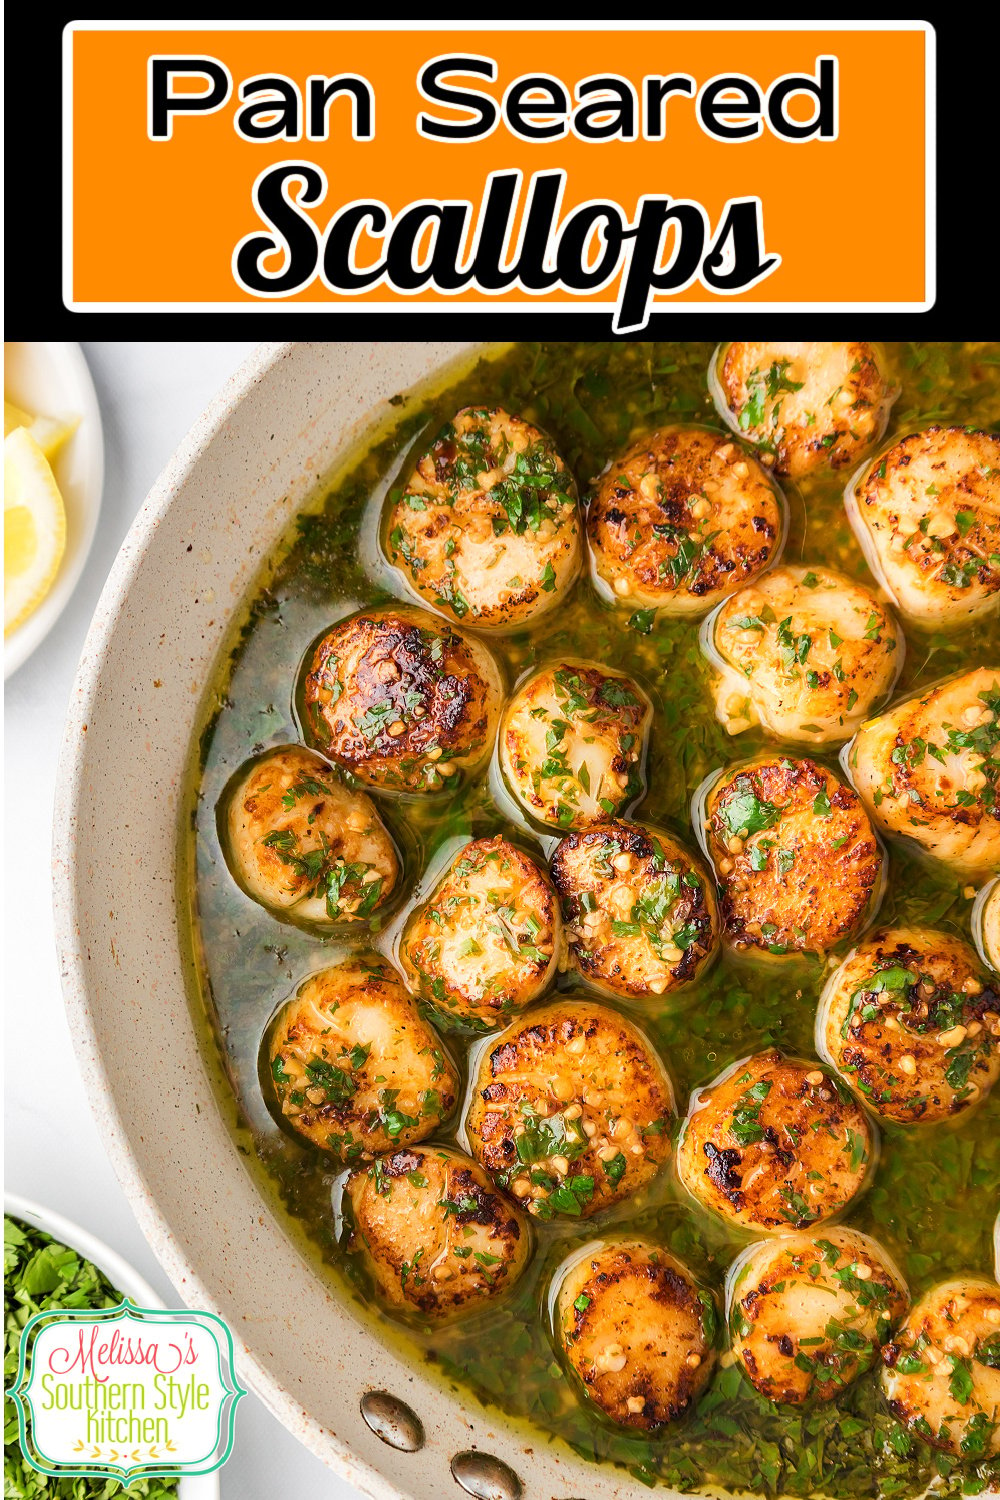 These crusted Seared Scallops are basted with a fresh lemon garlic butter pan sauce for an easy and impressive seafood dish. #scallops #searedscallops #seafoodrecipes #lemonbutter #scallopswithlemon #cookedscallops pansearedscallops via @melissasssk